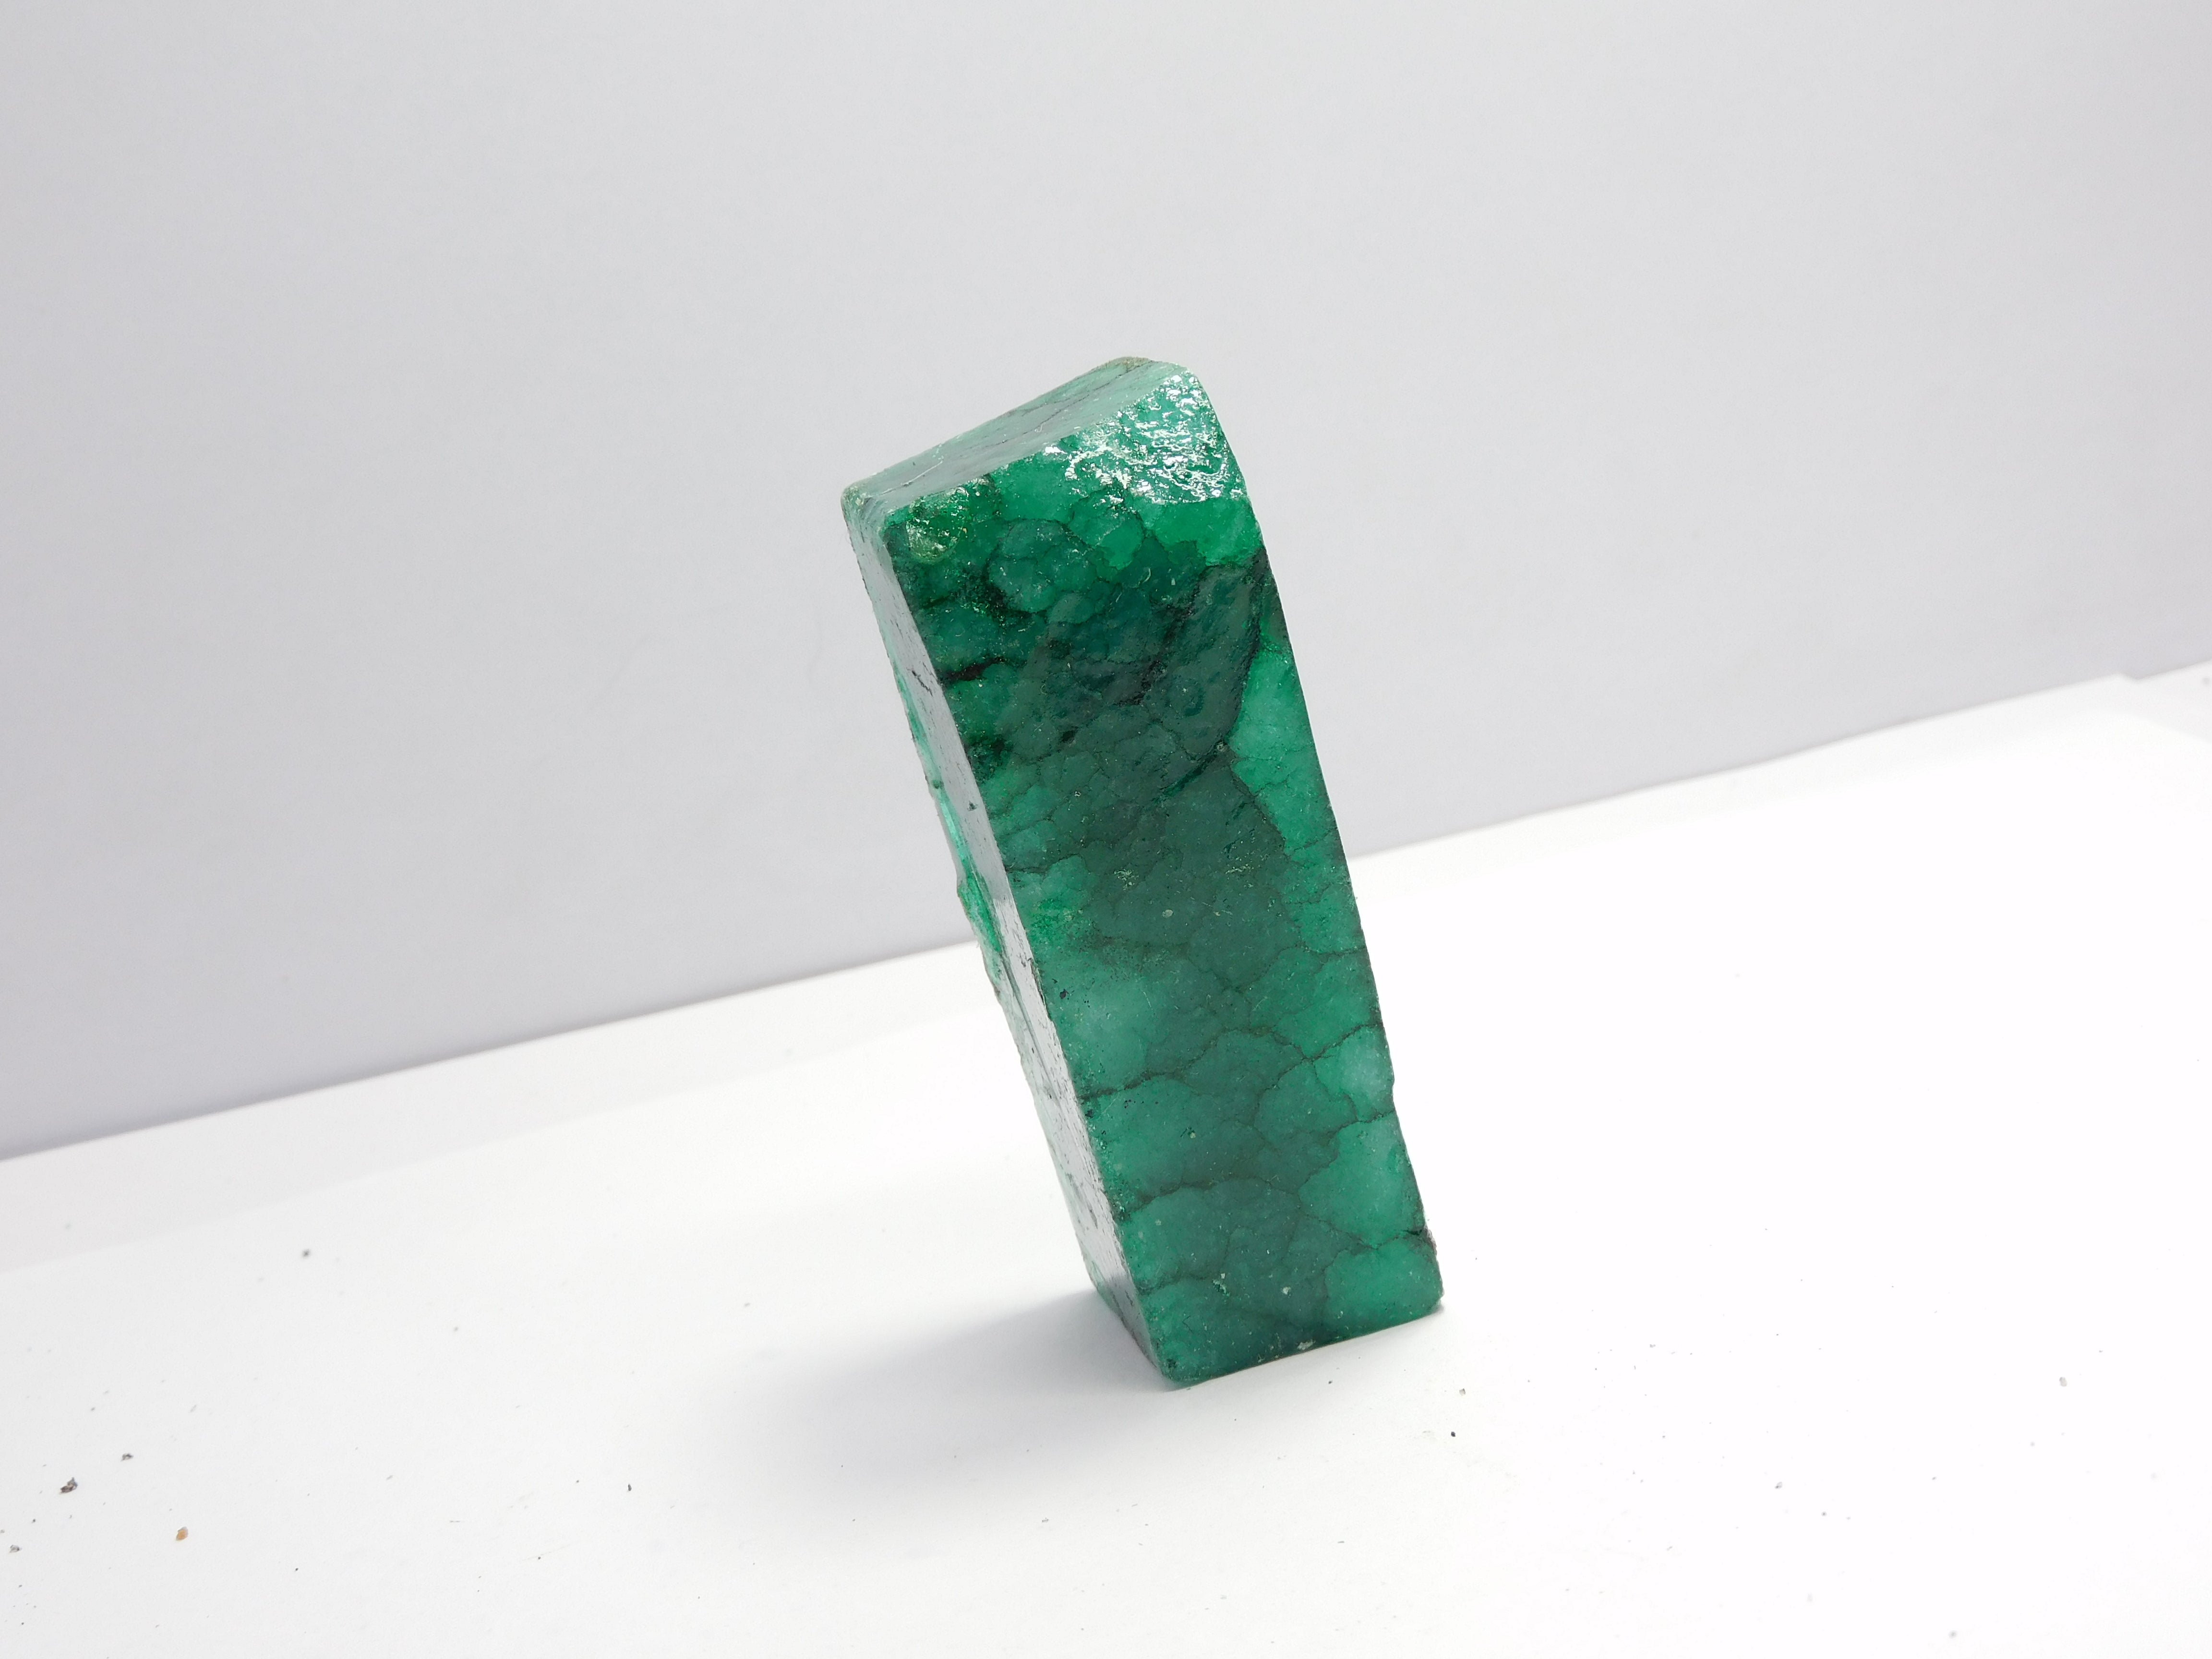 Healing Rough - Natural Green Colombian Emerald 508.25 Carat Emerald Green CERTIFIED Loose Gemstone Raw Rough| Best For Jwelery Making | Gift Gift For Her/ Him